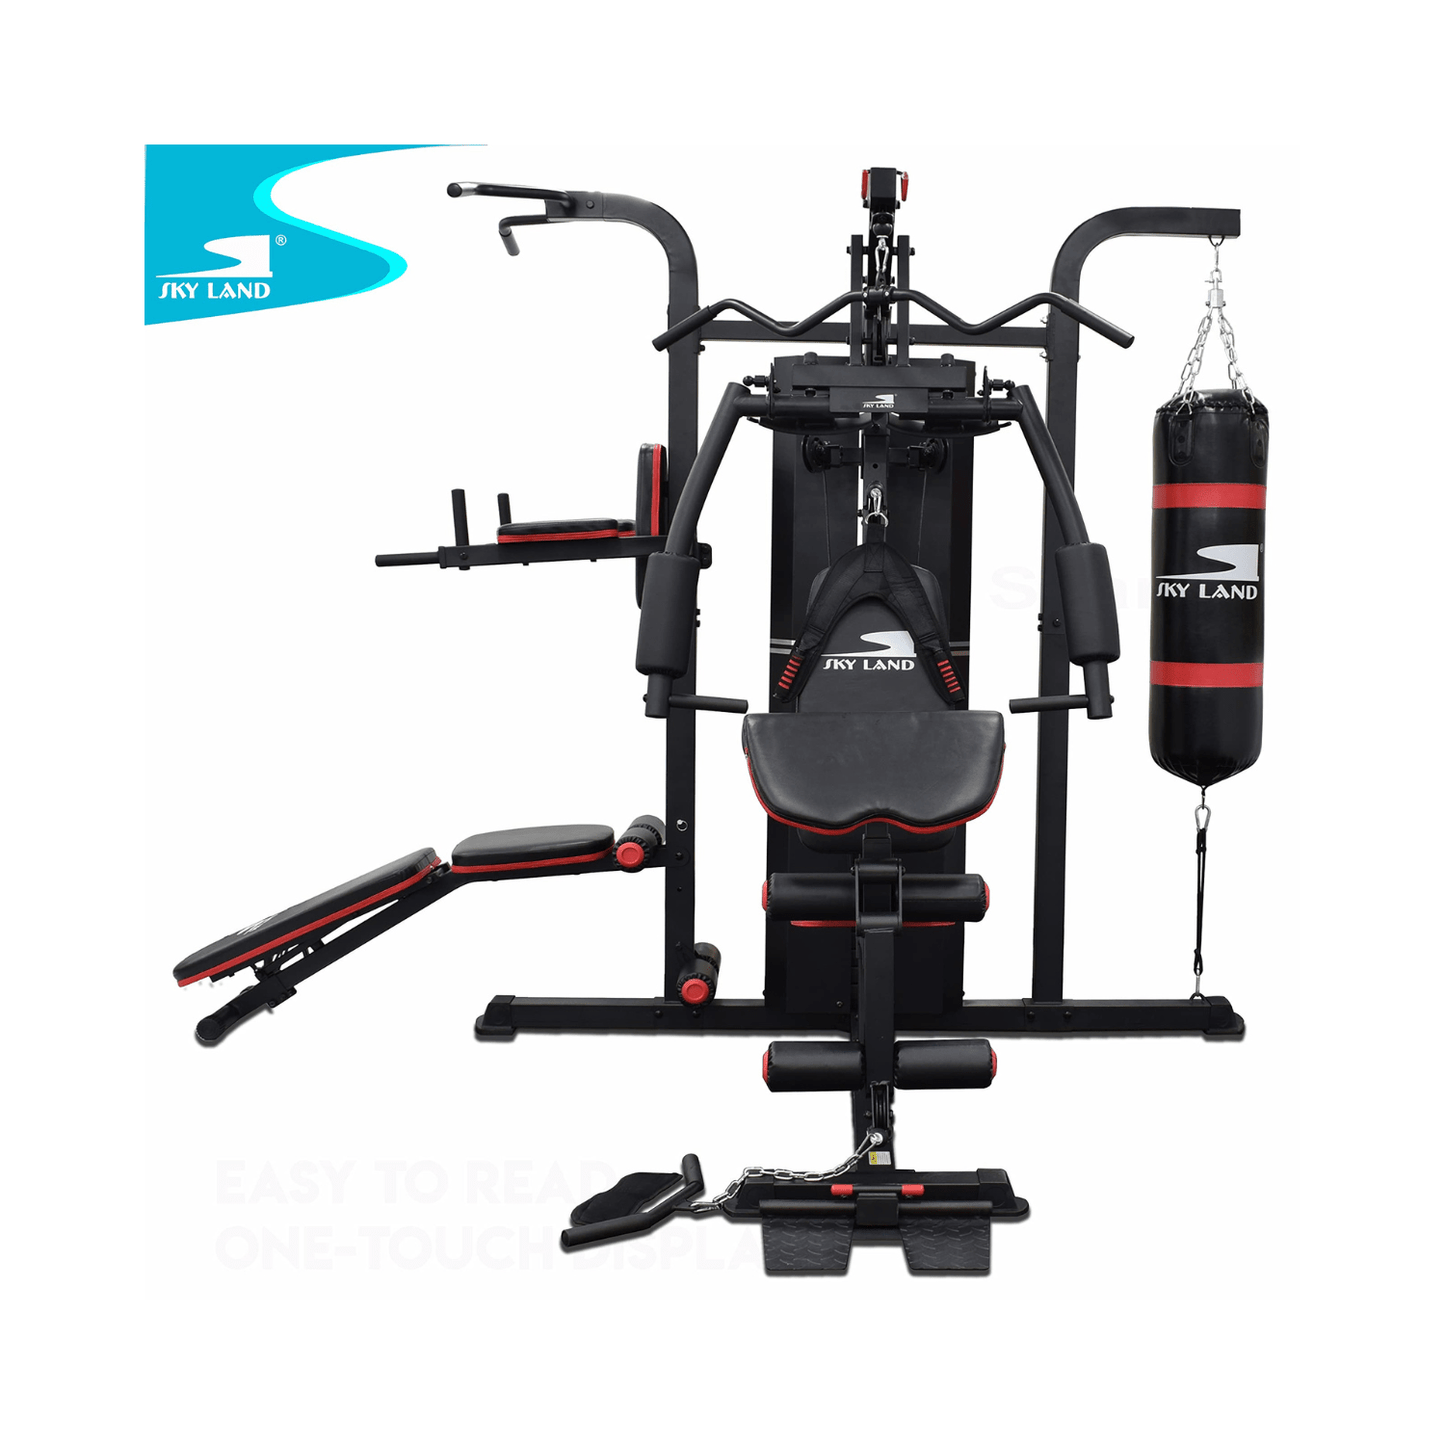 3 Station Multifunctional Home Gym GM-8138 SKY LAND - COOLBABY